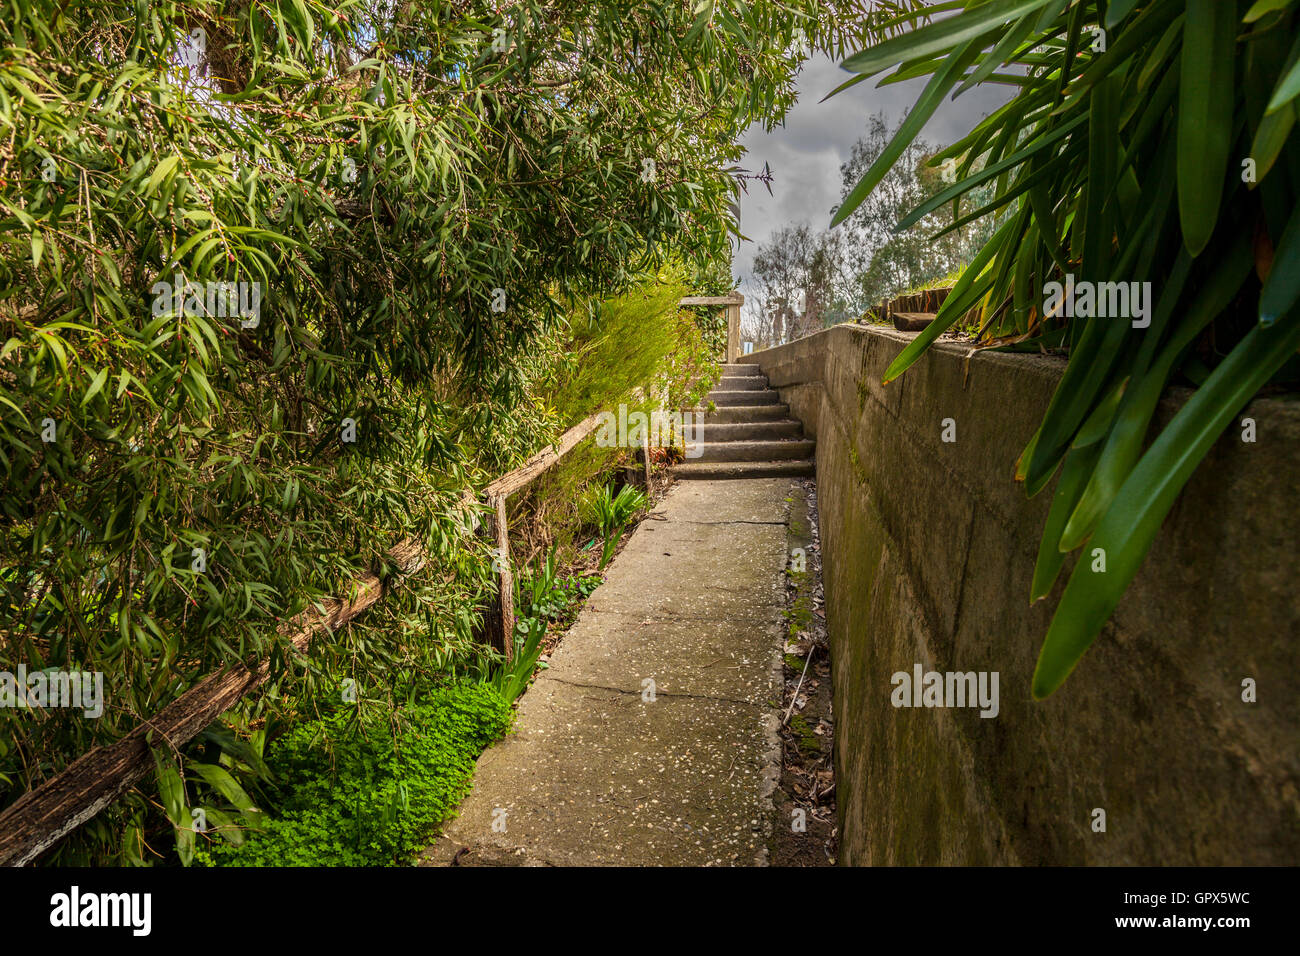 Concrete pathway in the shade of overgrown shrubs leading up to an open and bright area Stock Photo